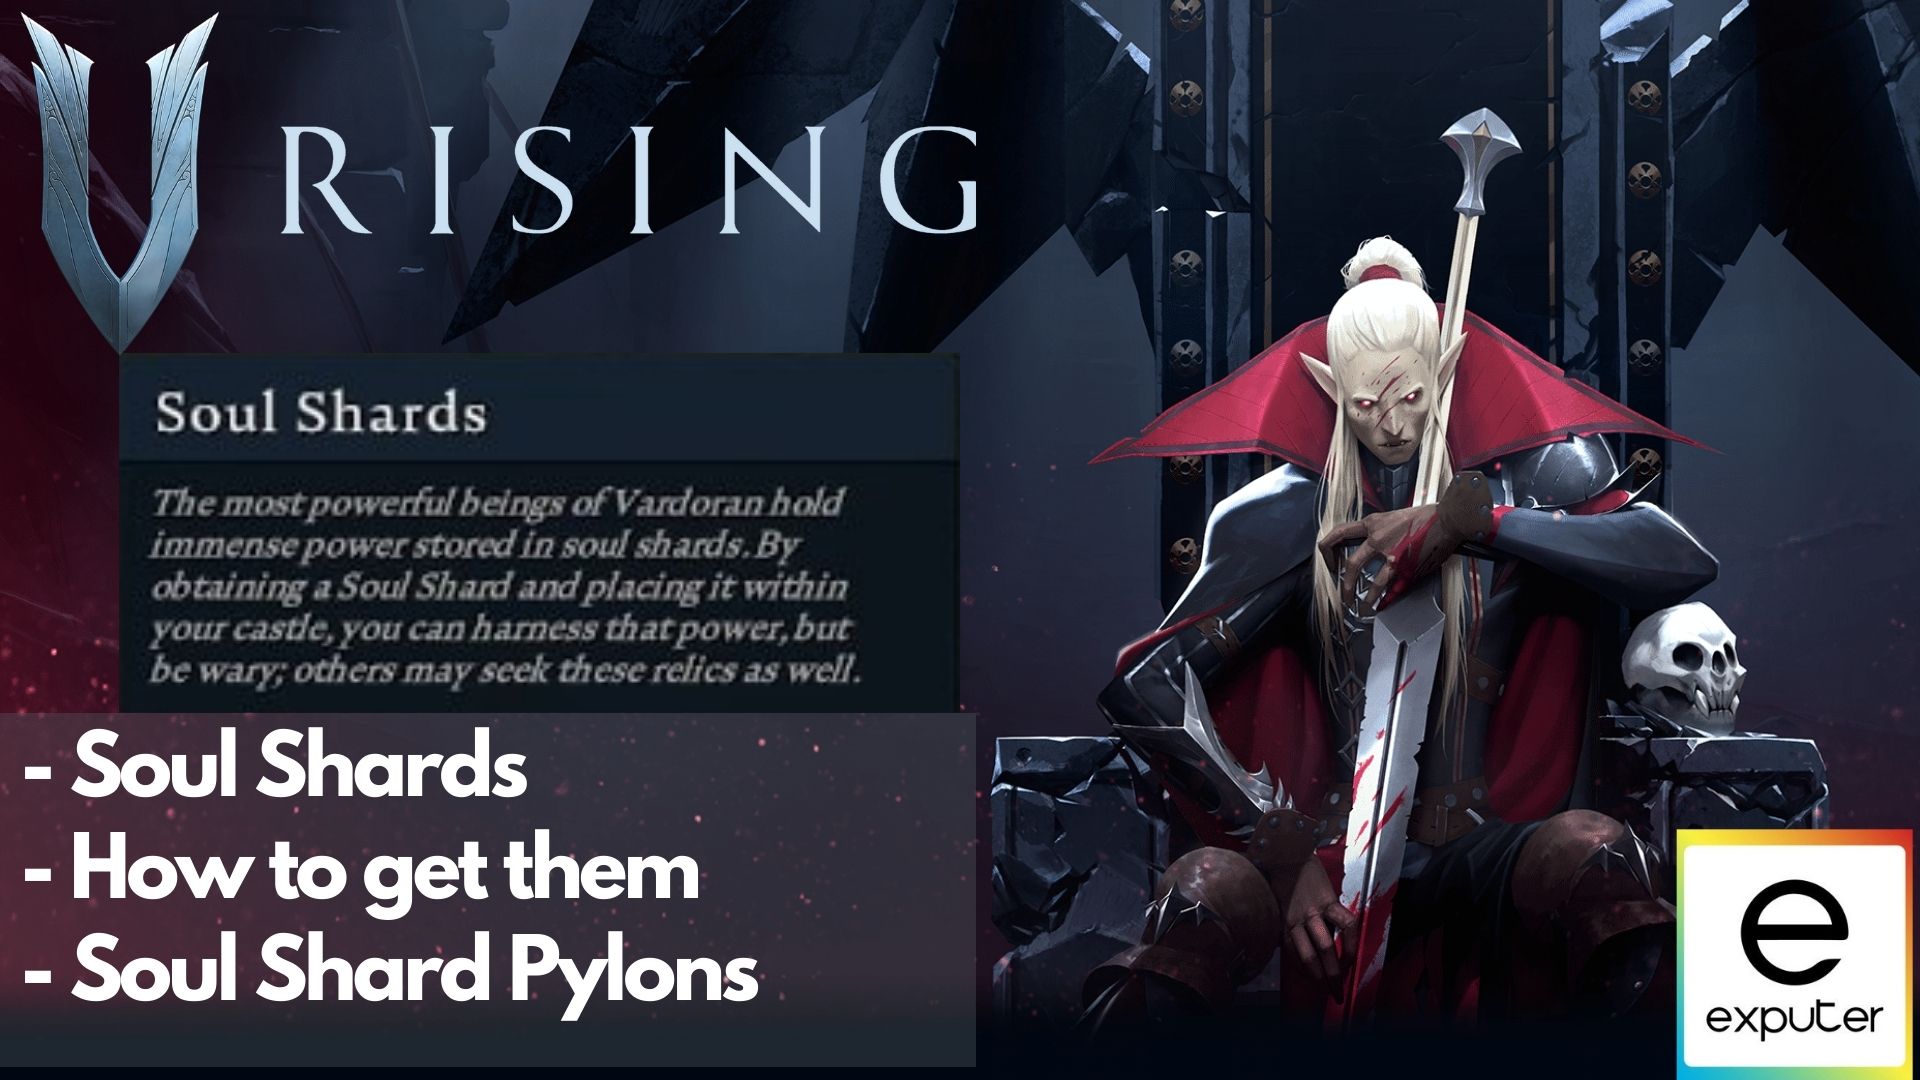 V Rising Soul Shards Guide-Featured Image